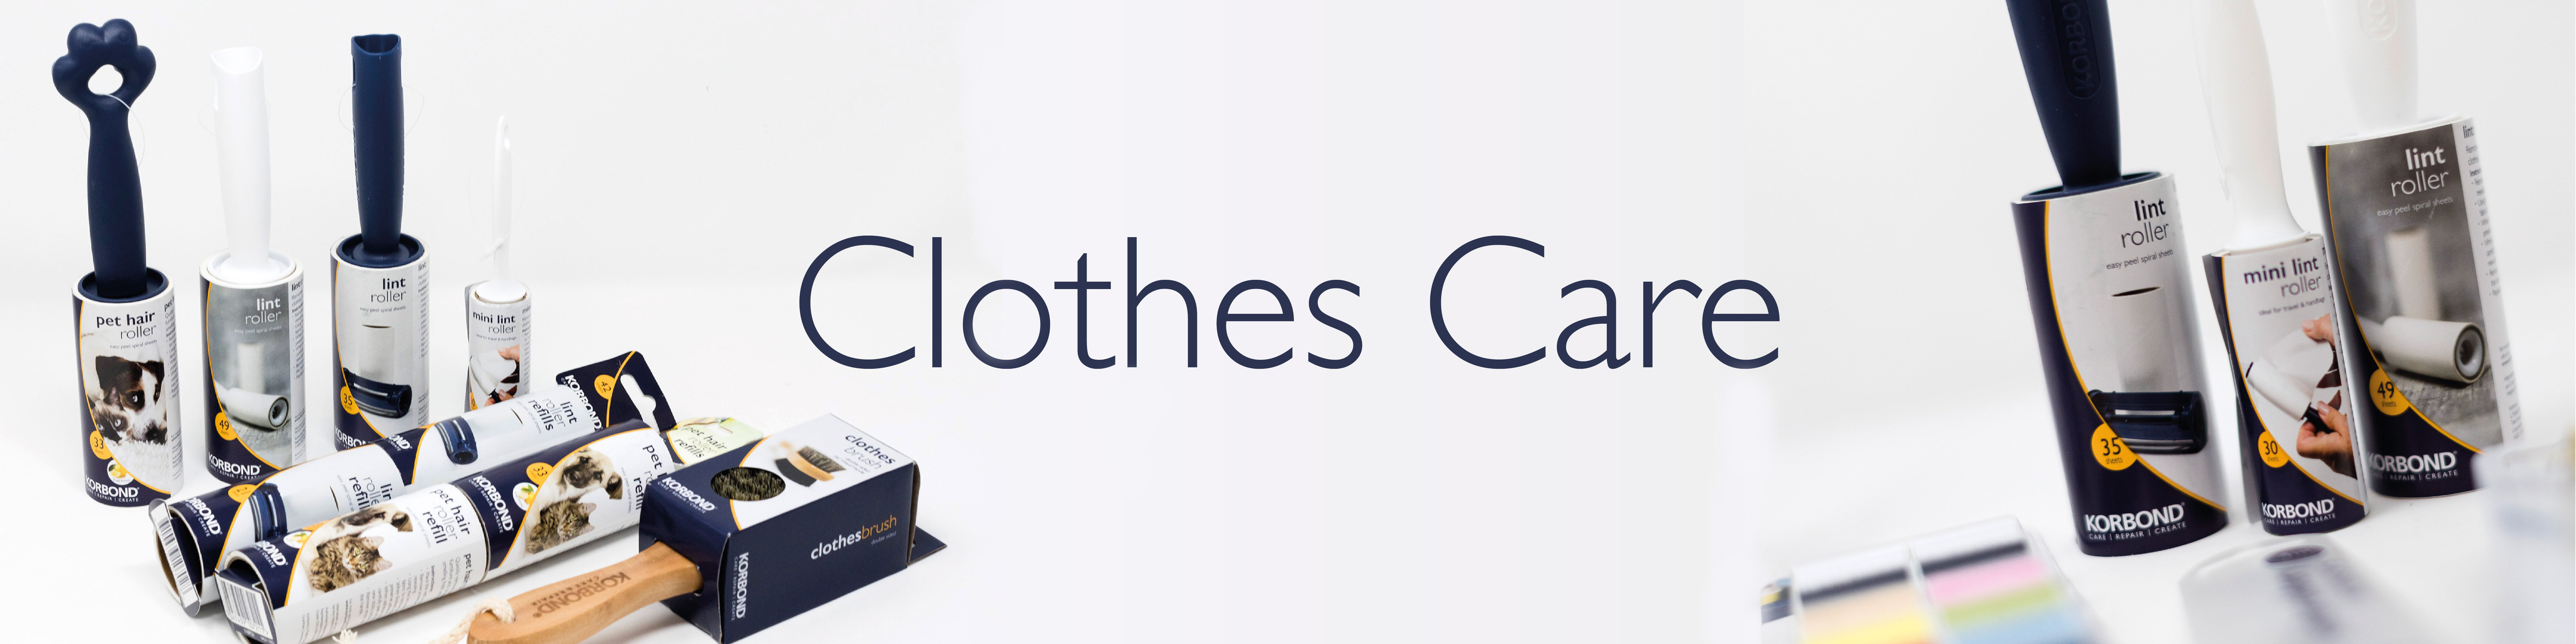 Clothes Care